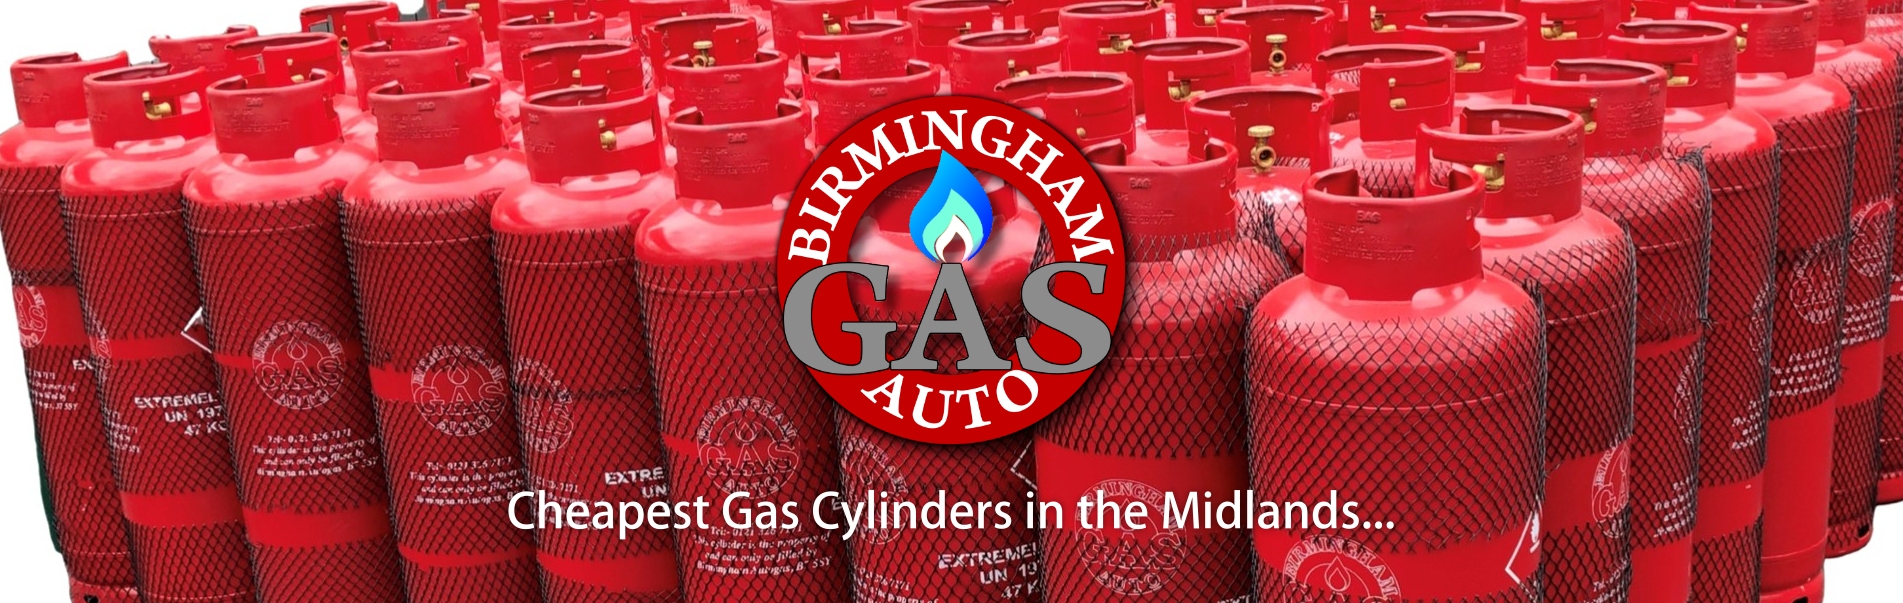 Cheapest Gas Cylinders in the Midlands